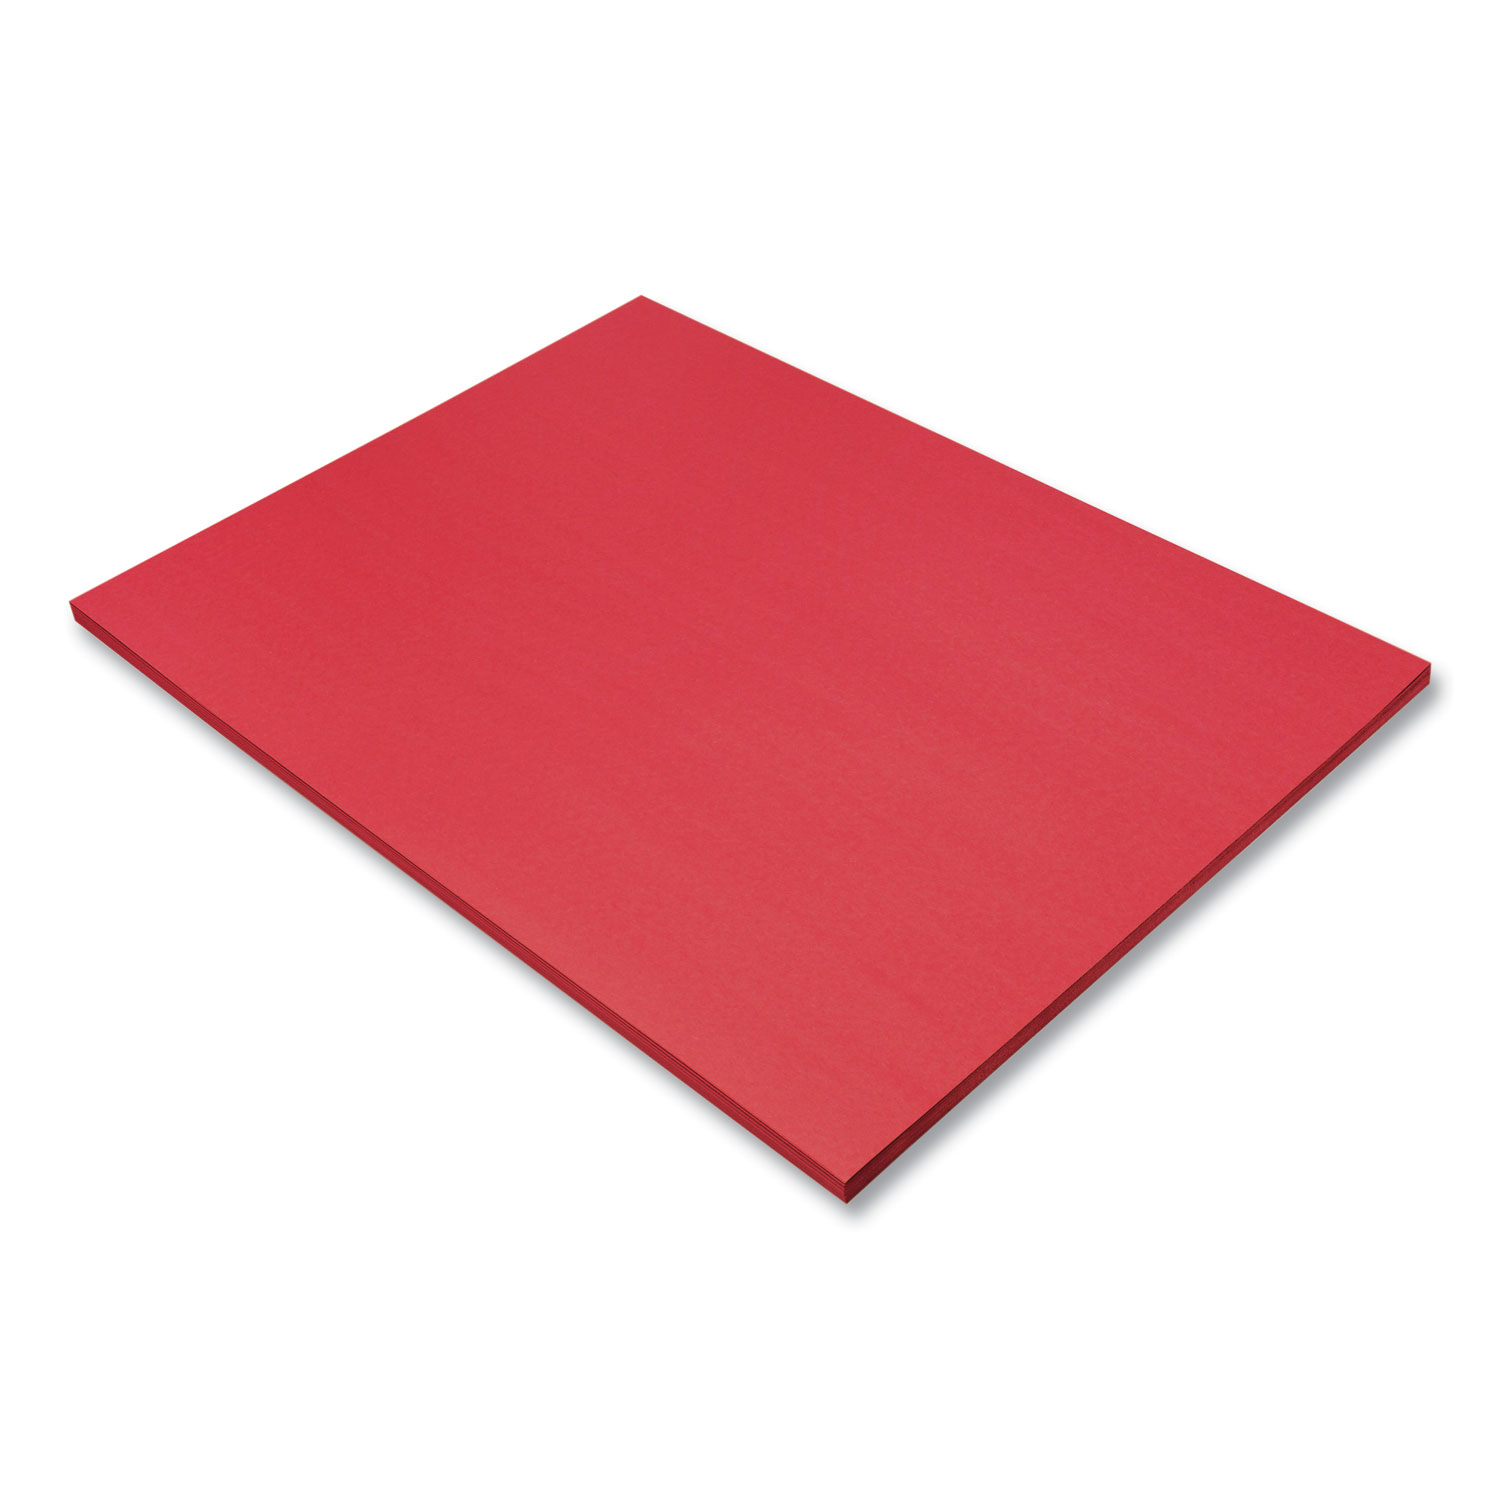 SunWorks® 12 x 18 Holiday Red Construction Paper, 3 Packs of 100 Sheets